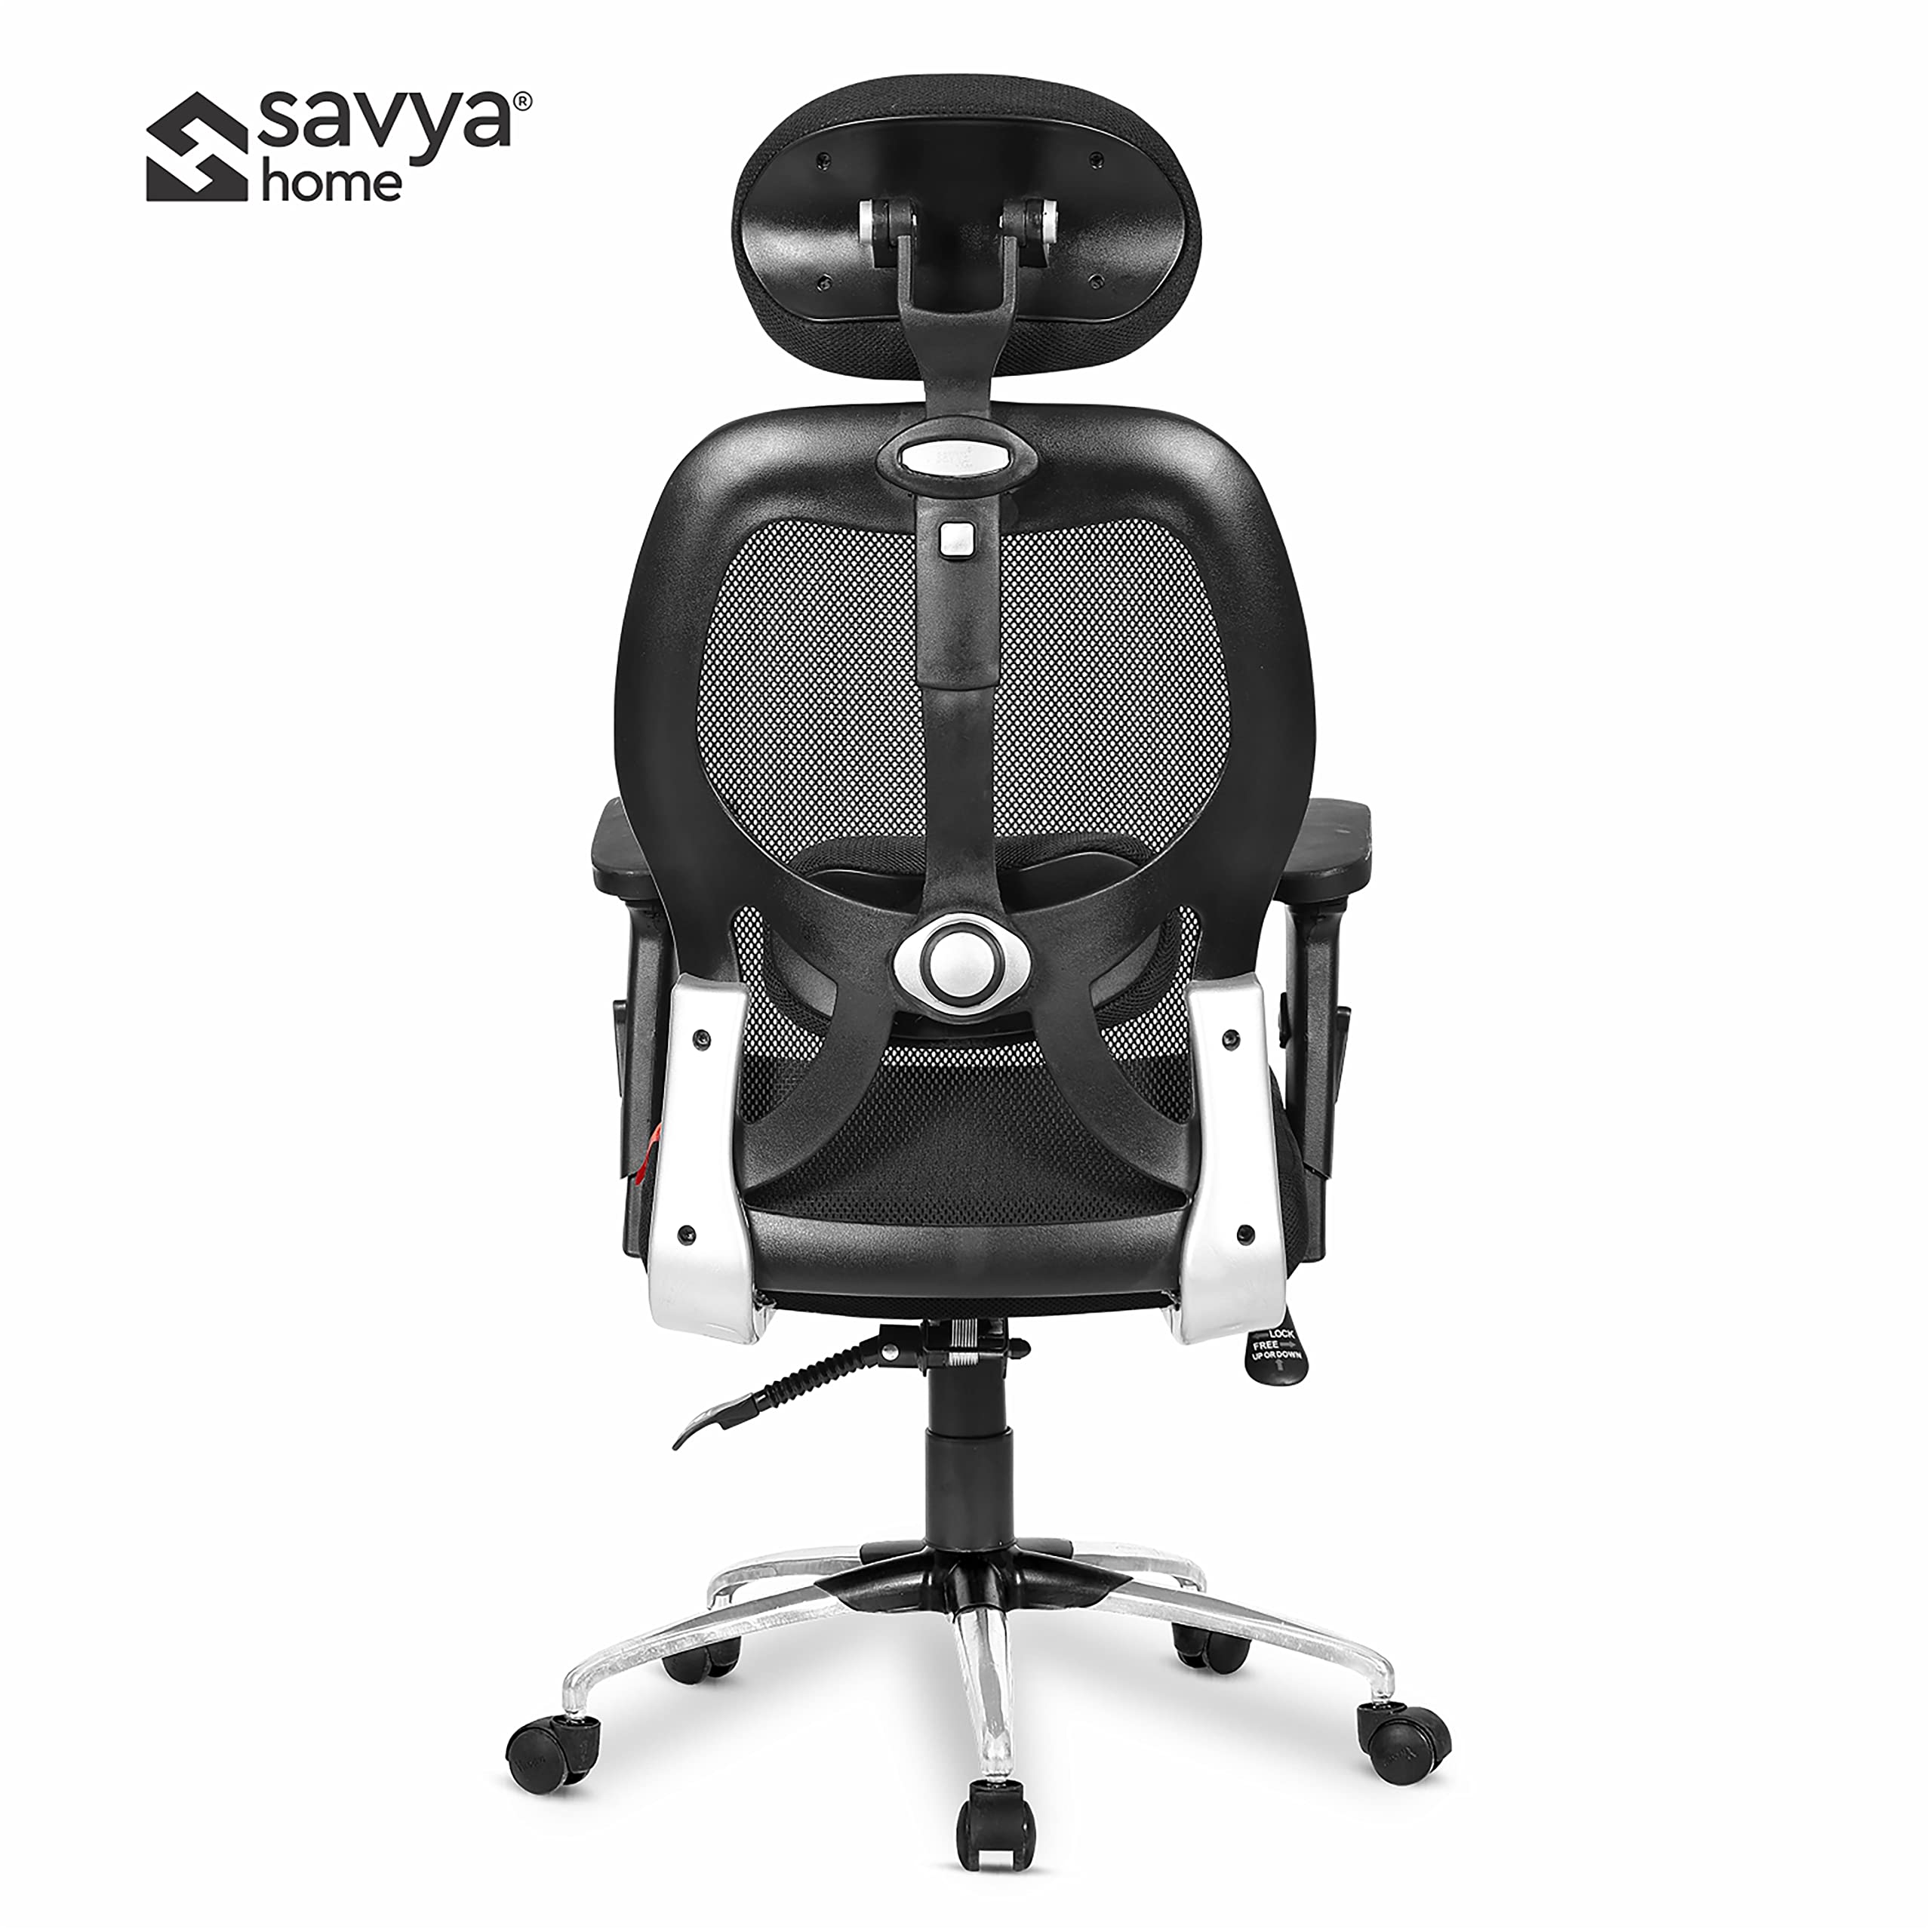 SAVYA HOME Apollo High Back Ergonomic Office Chair with 3D Adjustable Arms and Anyposition Tilt Lock Mechanism (2D Lumbar Support & Contoured Meshback, Black, 1 Piece)